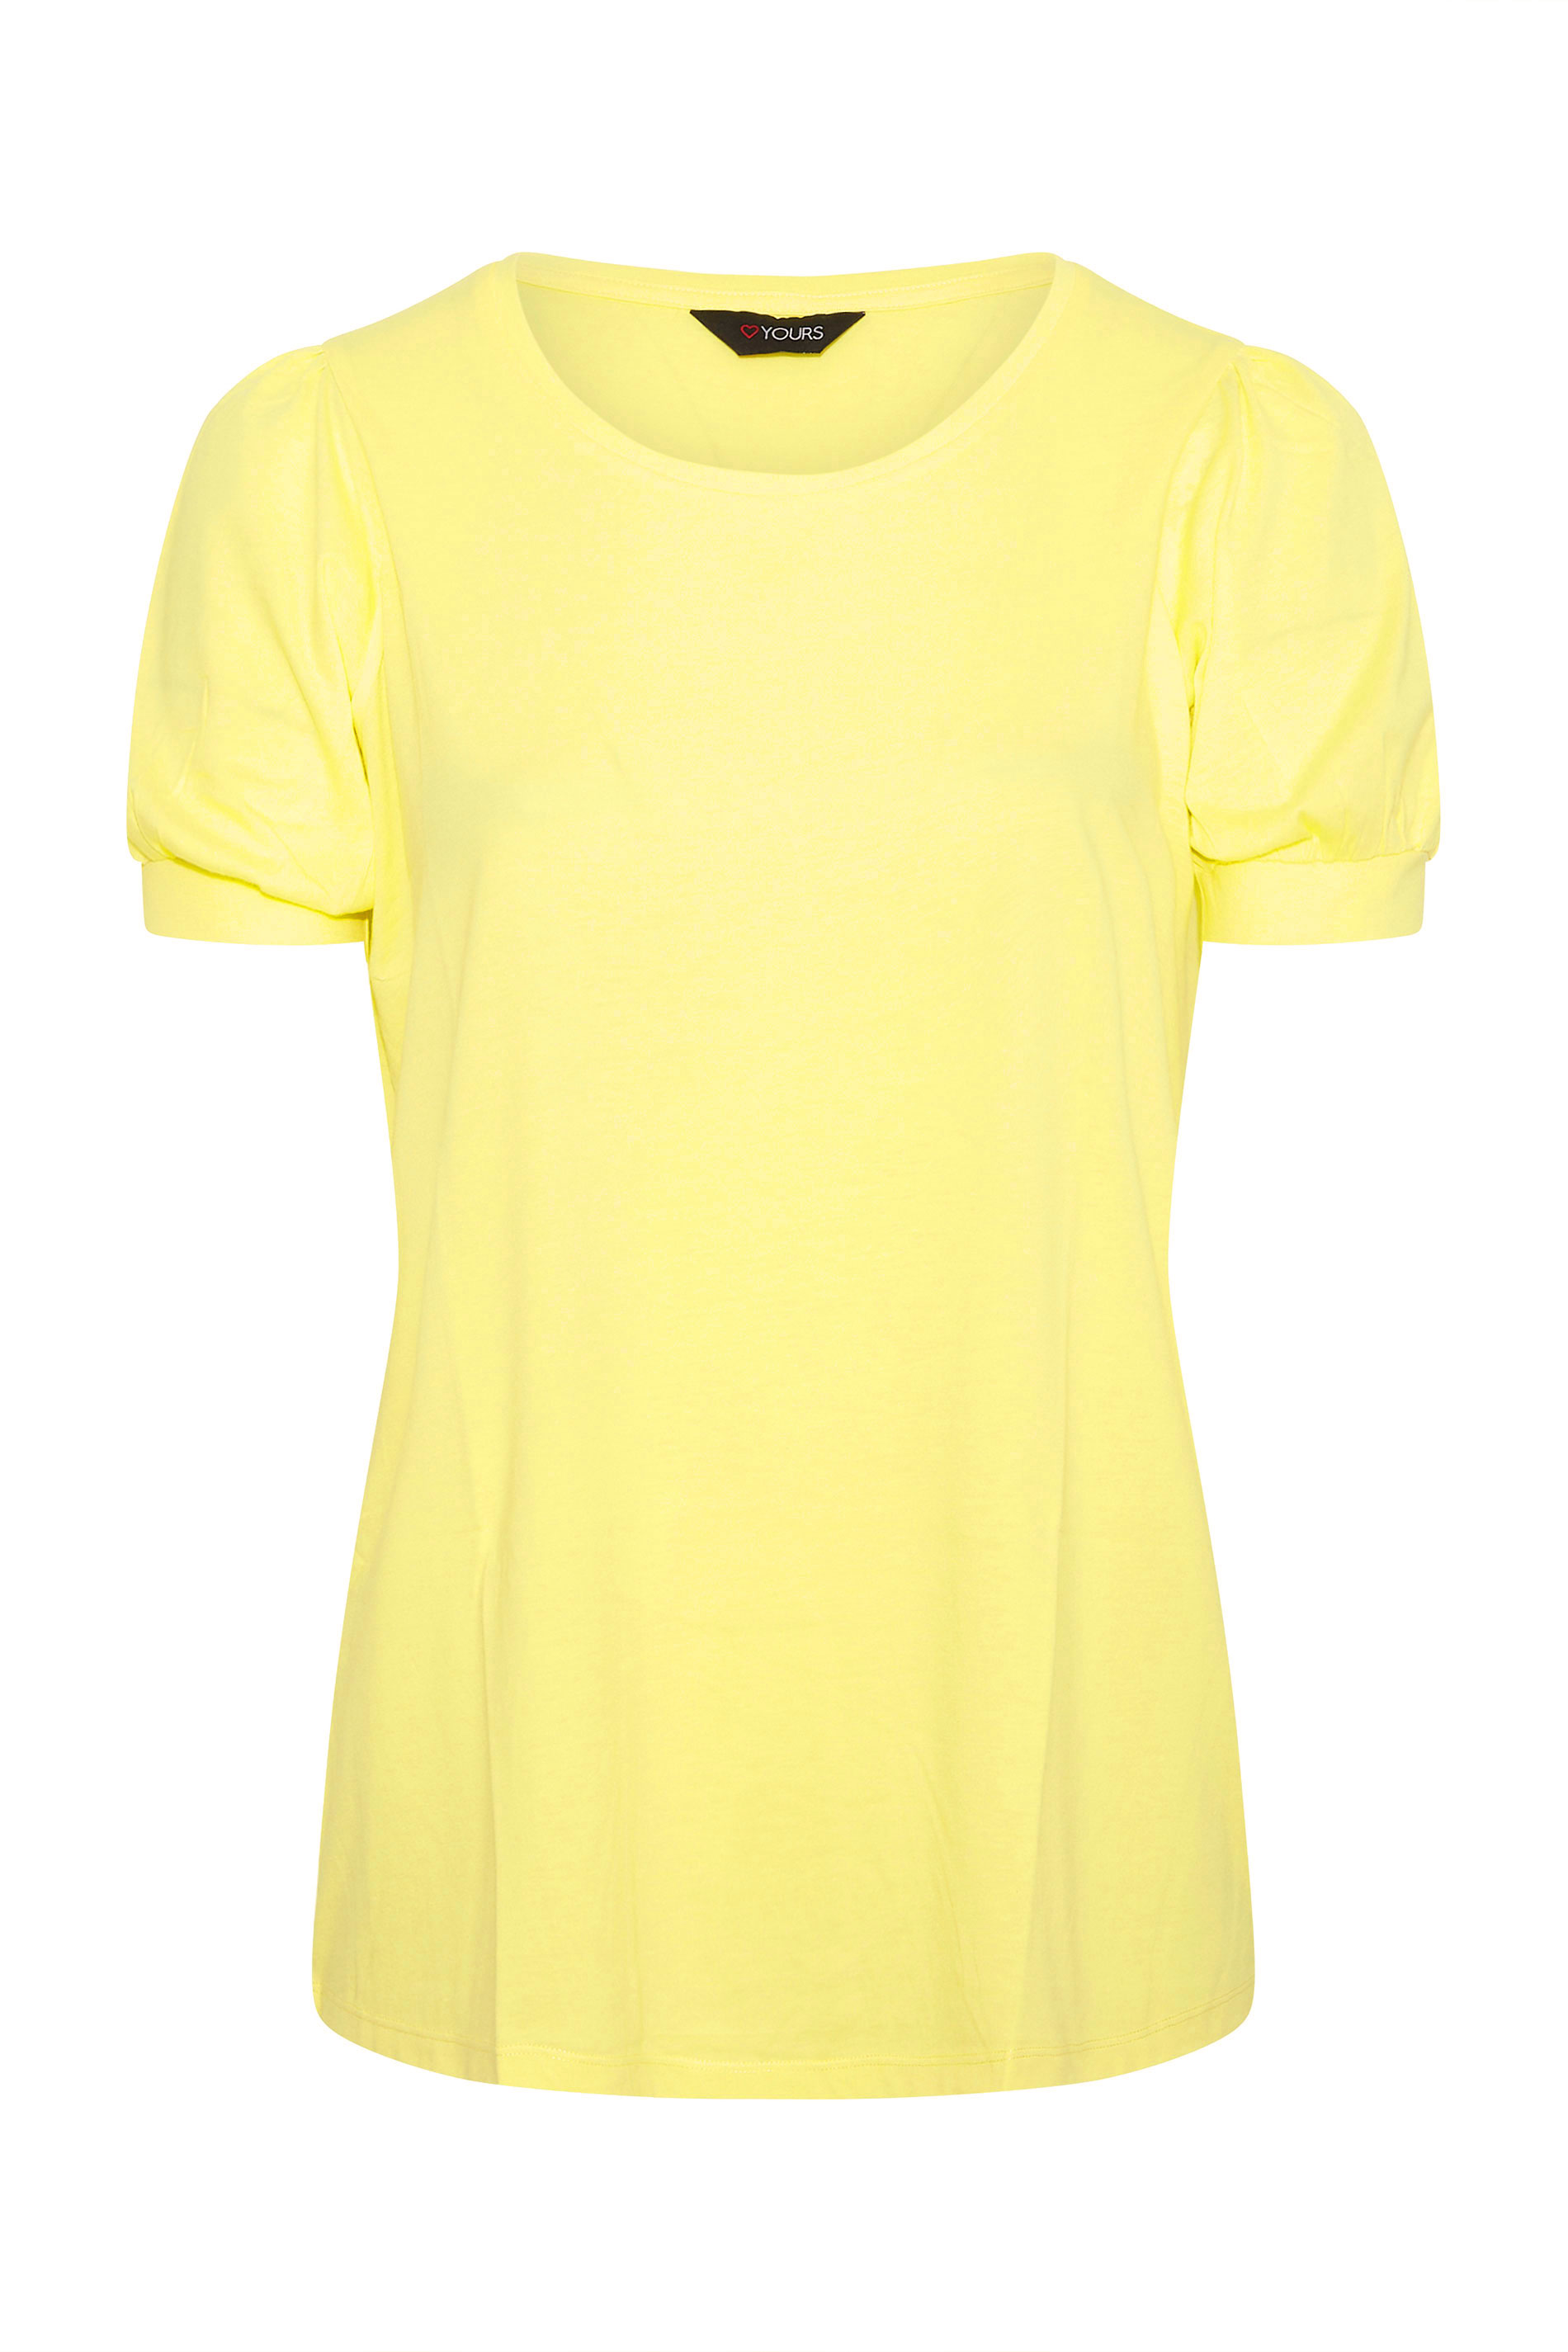 Grande taille  Tops Grande taille  T-Shirts | T-Shirt Jaune Manches Courtes Bouffantes - WM86629